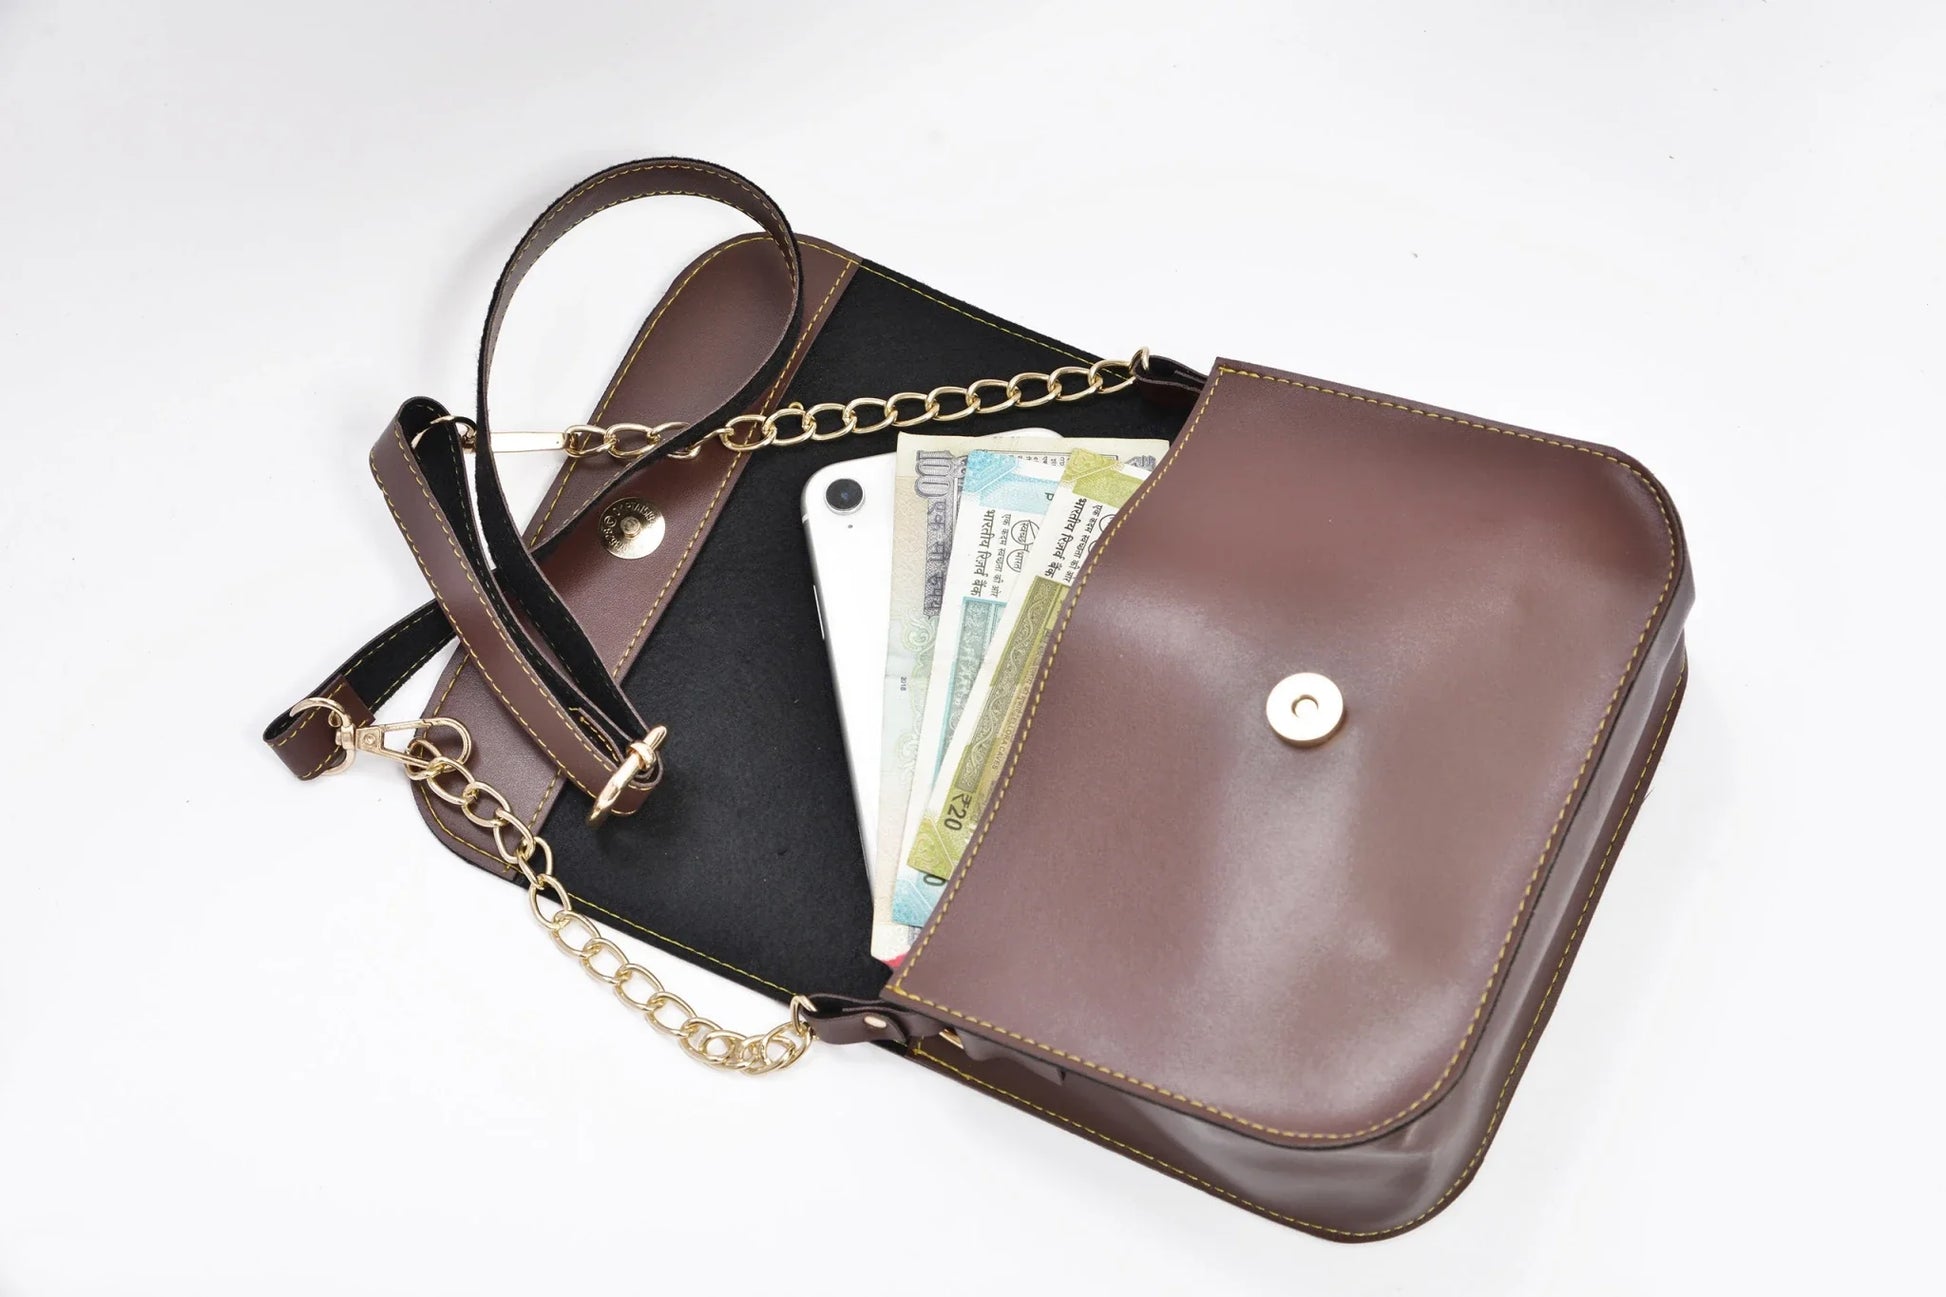 inside or open view of chained sling bag-brown